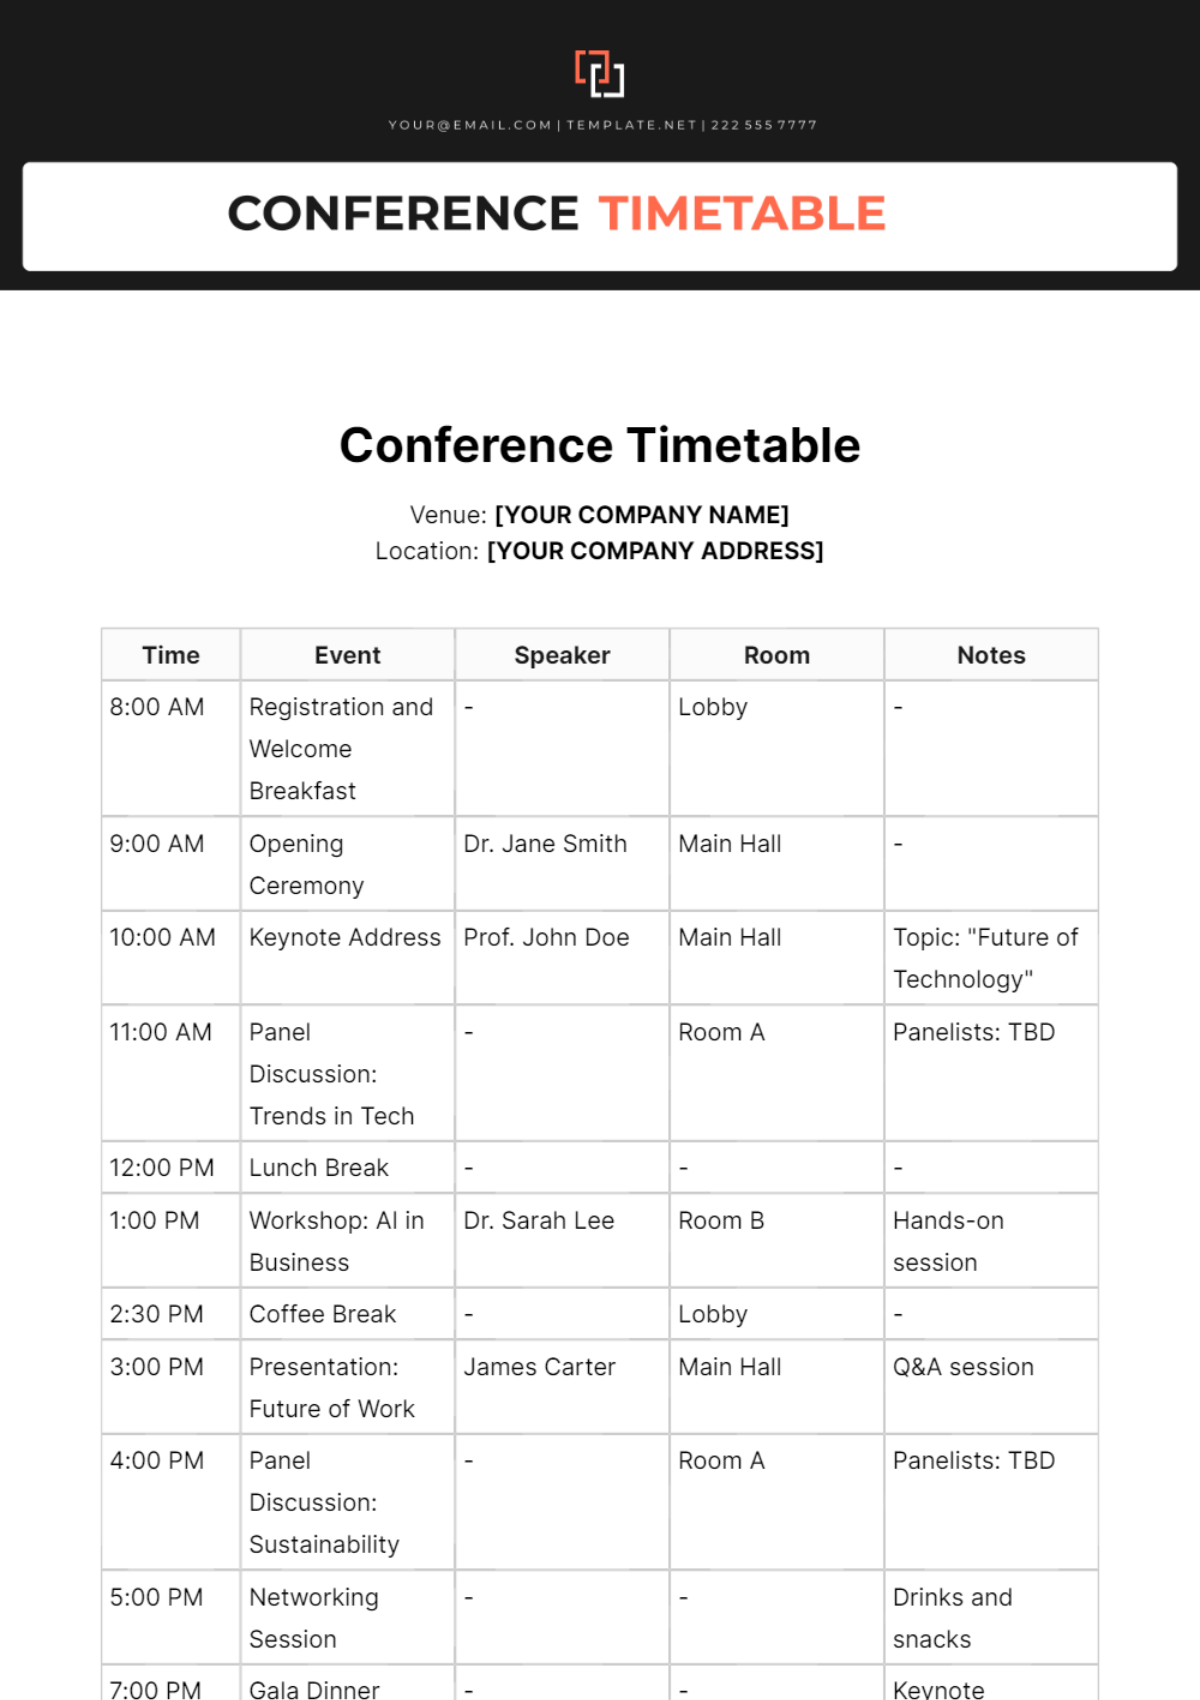 Free Conference Timetable Template